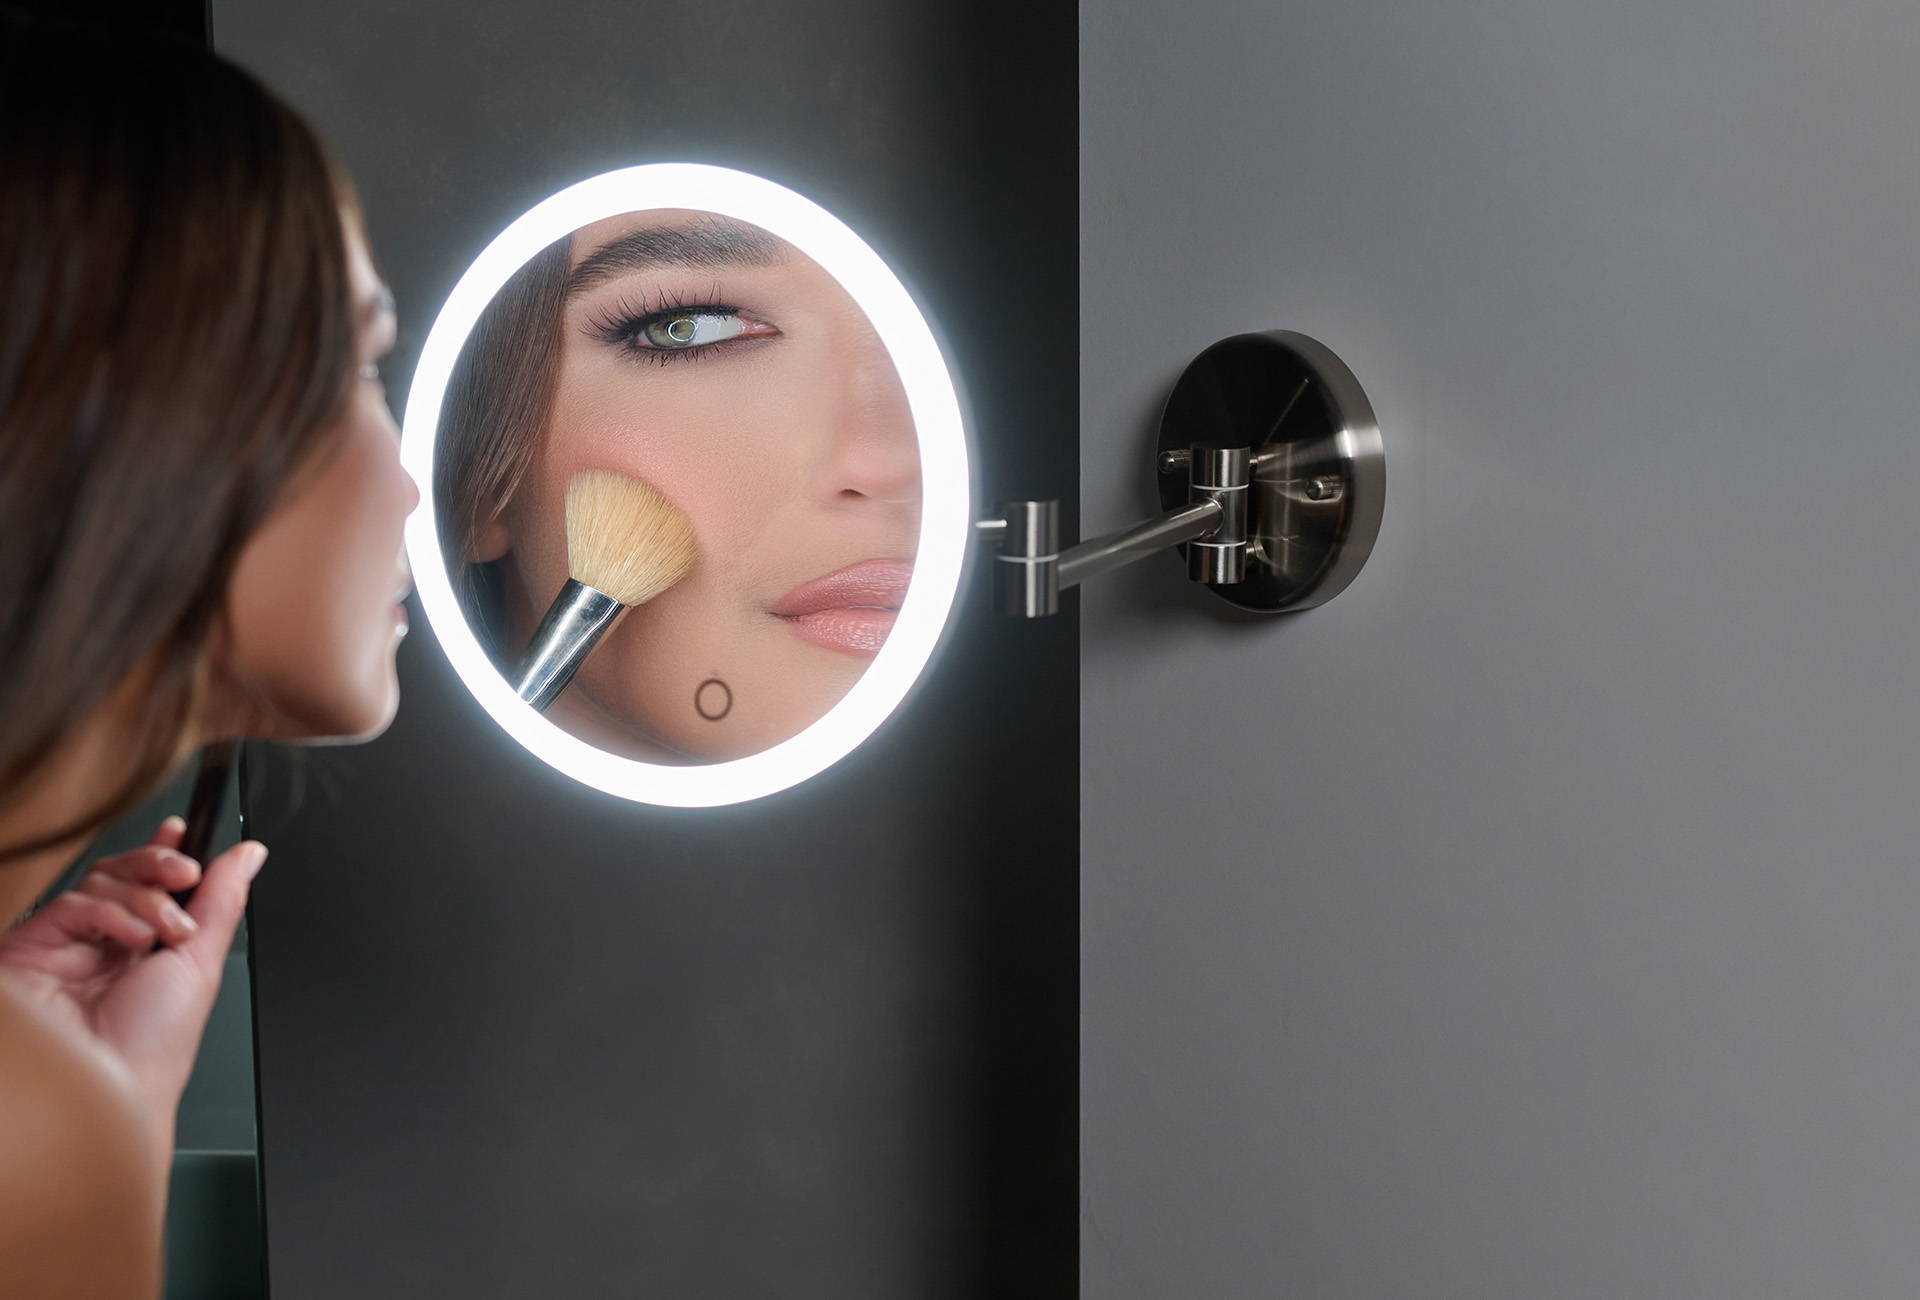 Ilios lighting Retractable wall lighted mirror with extender arm cordless and rechargeable 1x or 5x magnified lighted makeup mirror 